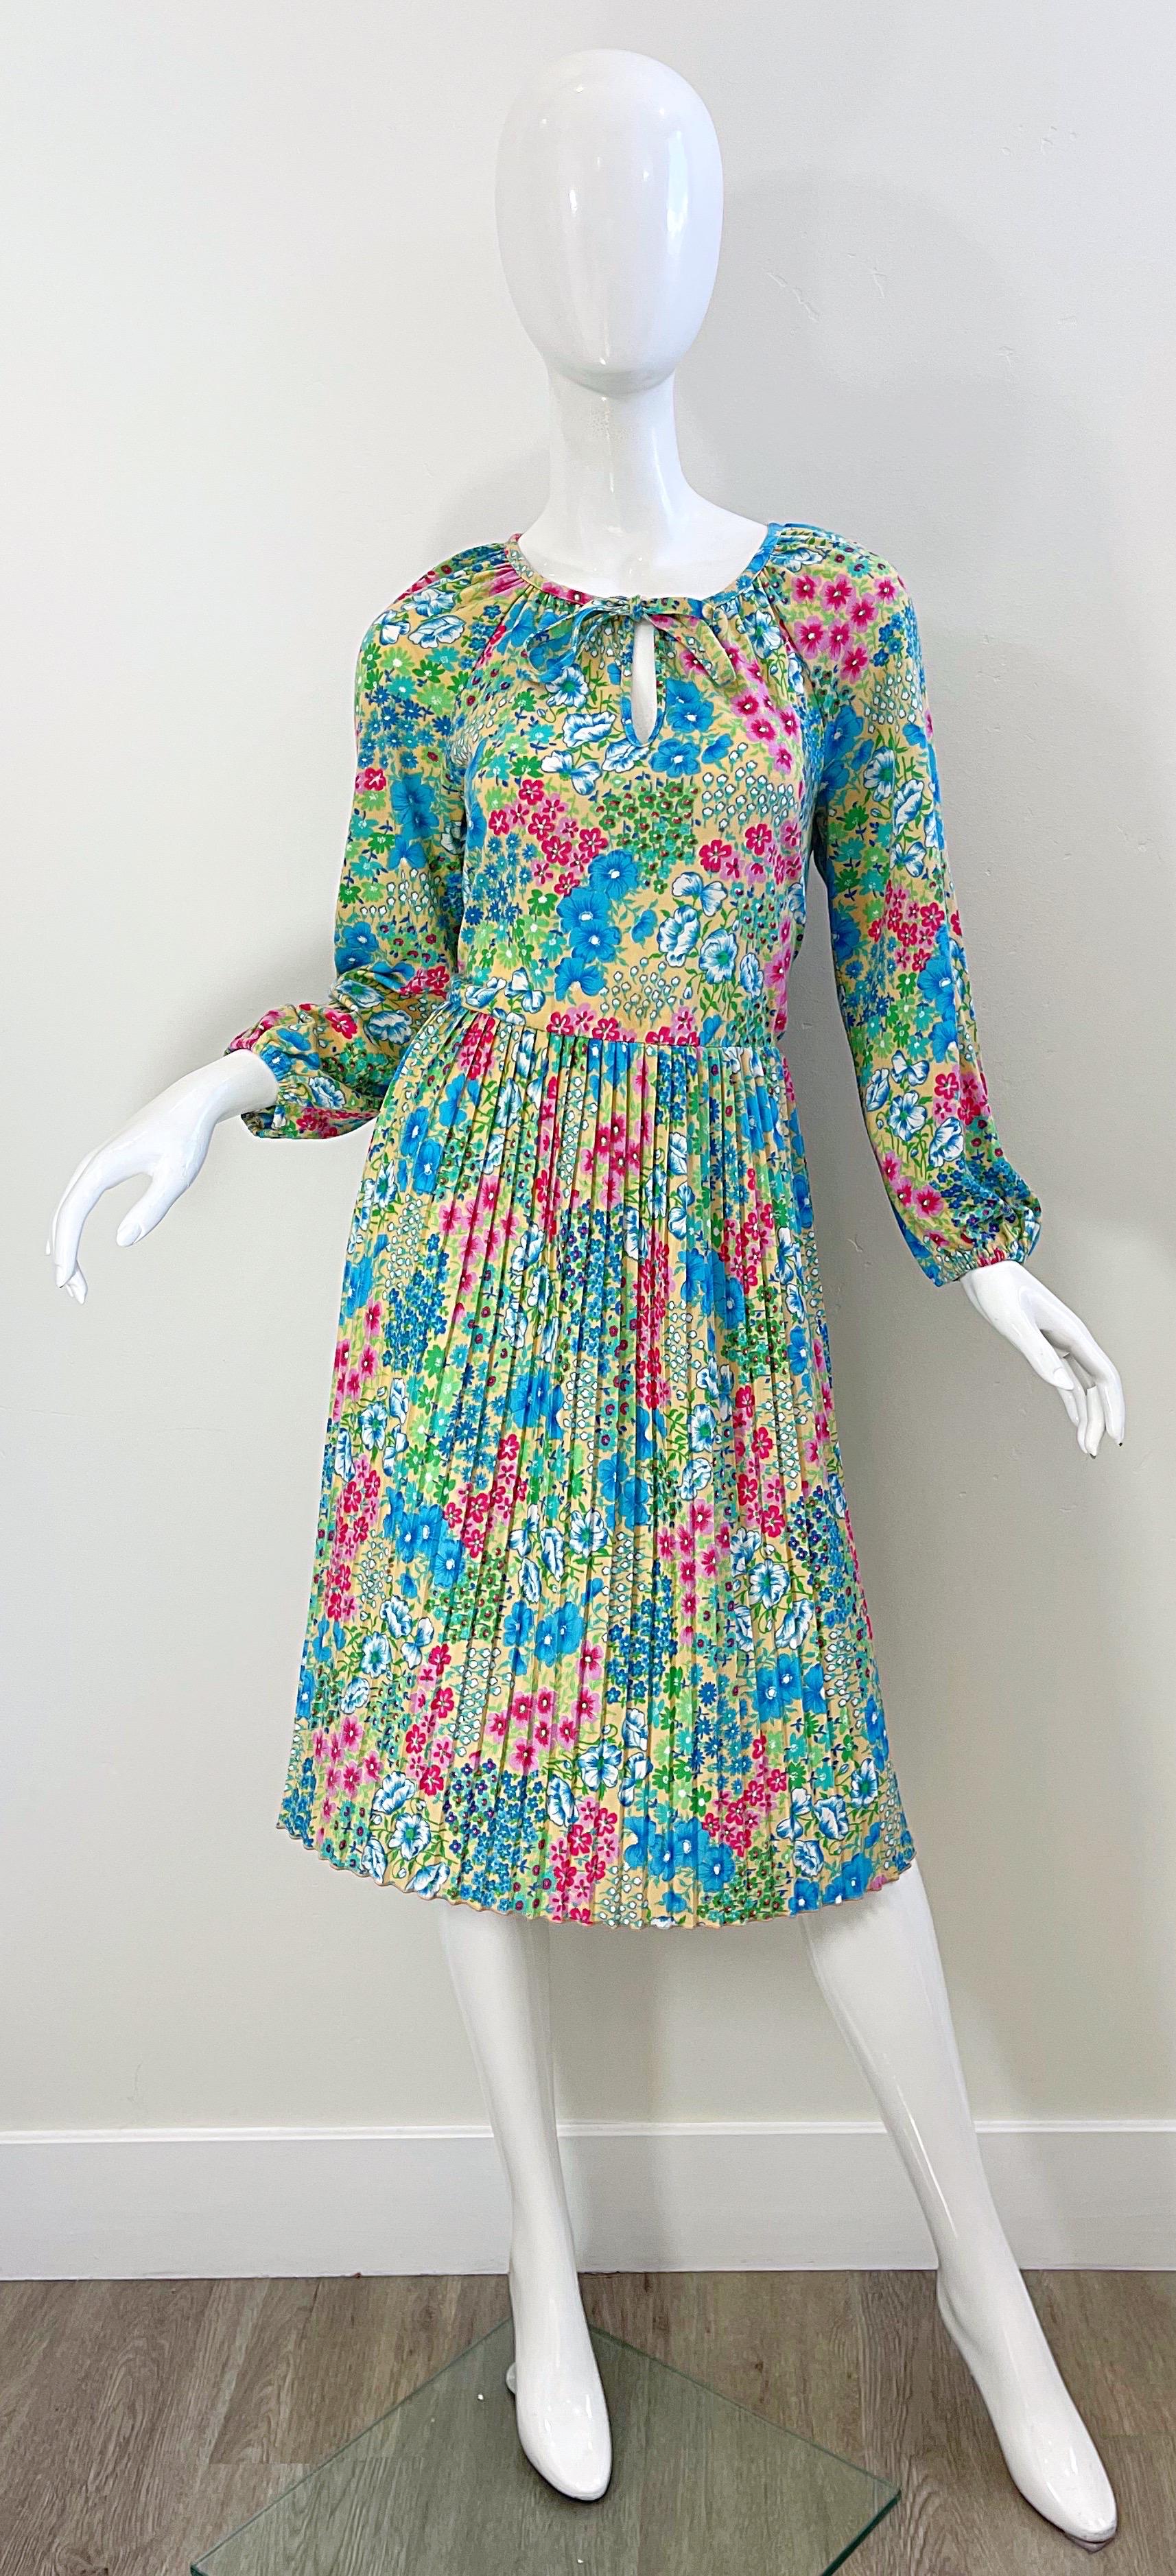 Chic vintage 70s ST. MICHAEL Italian made bright colorful flower print long sleeve dress ! Features vibrant colors of blue, pink, green, white and beige throughout. Simply slips over the head and stretches to fit. Tie at center neck can be tied into